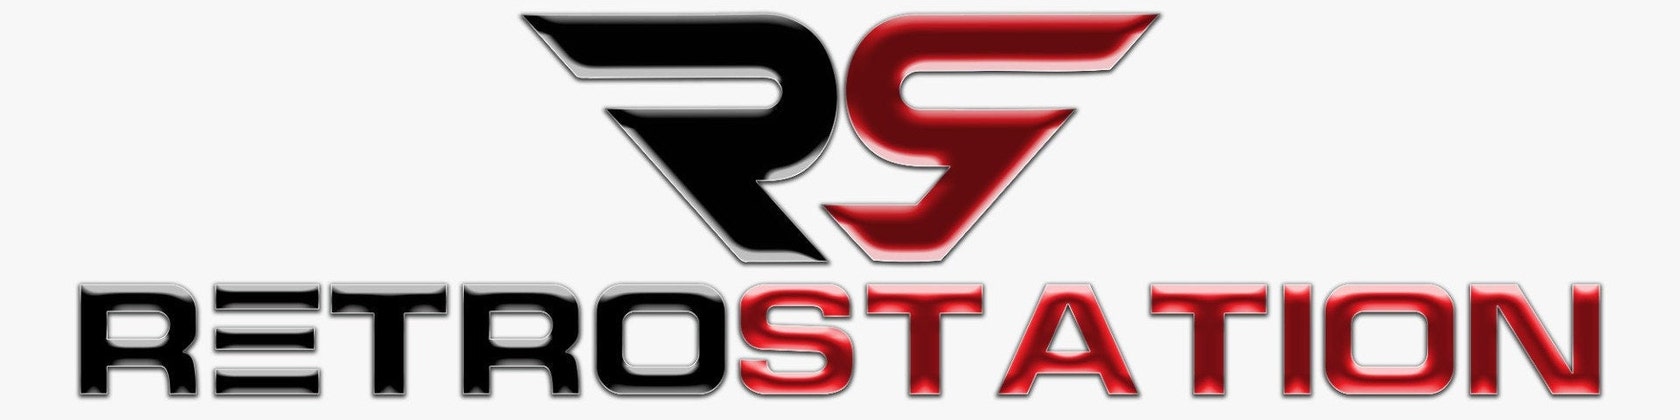 RetroStation Deck - Steam Deck - Asus Rog Ally and Windows PC - Make your  Retro Console - Explosion Of Fun